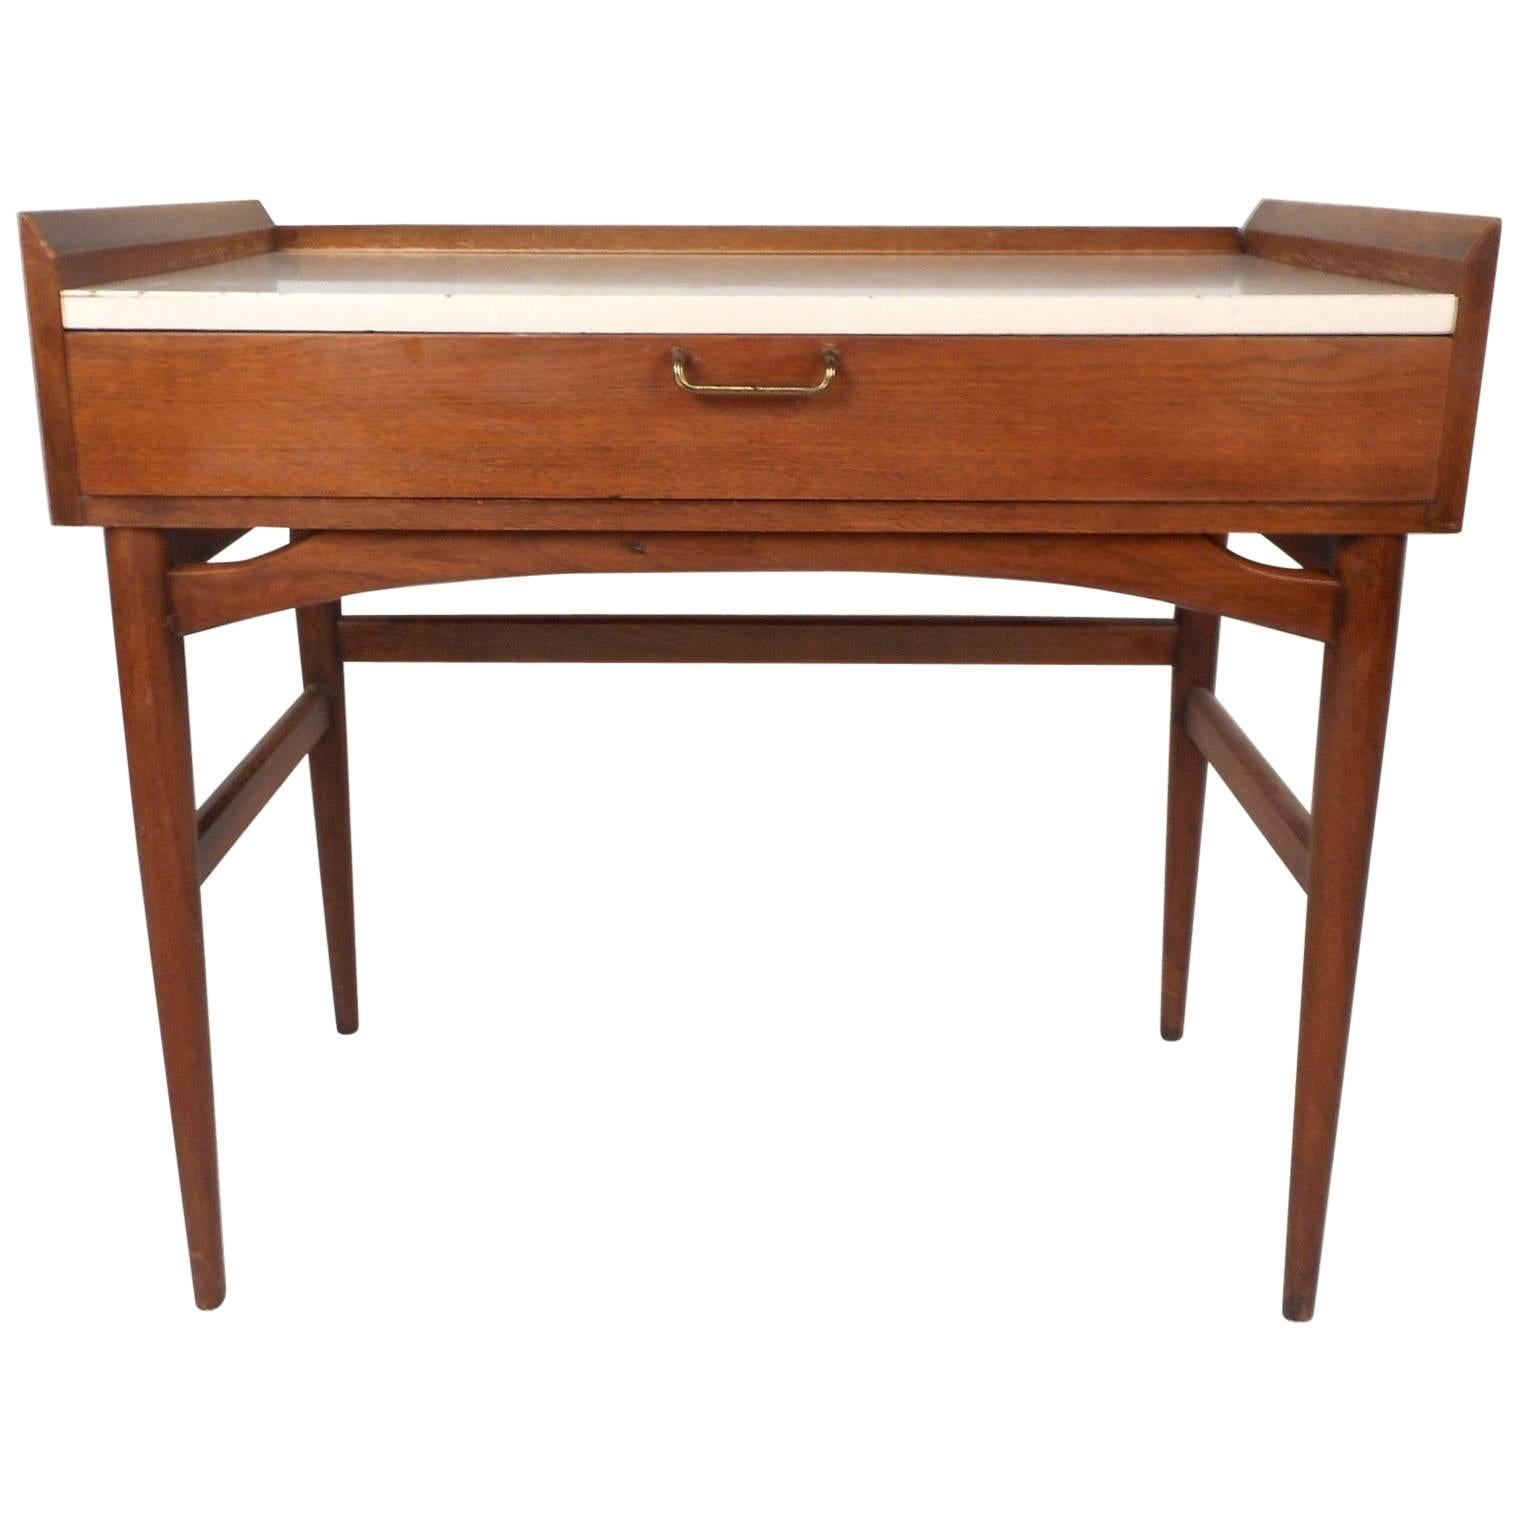 Small Mid-Century Modern Desk or Vanity by American of Martinsville